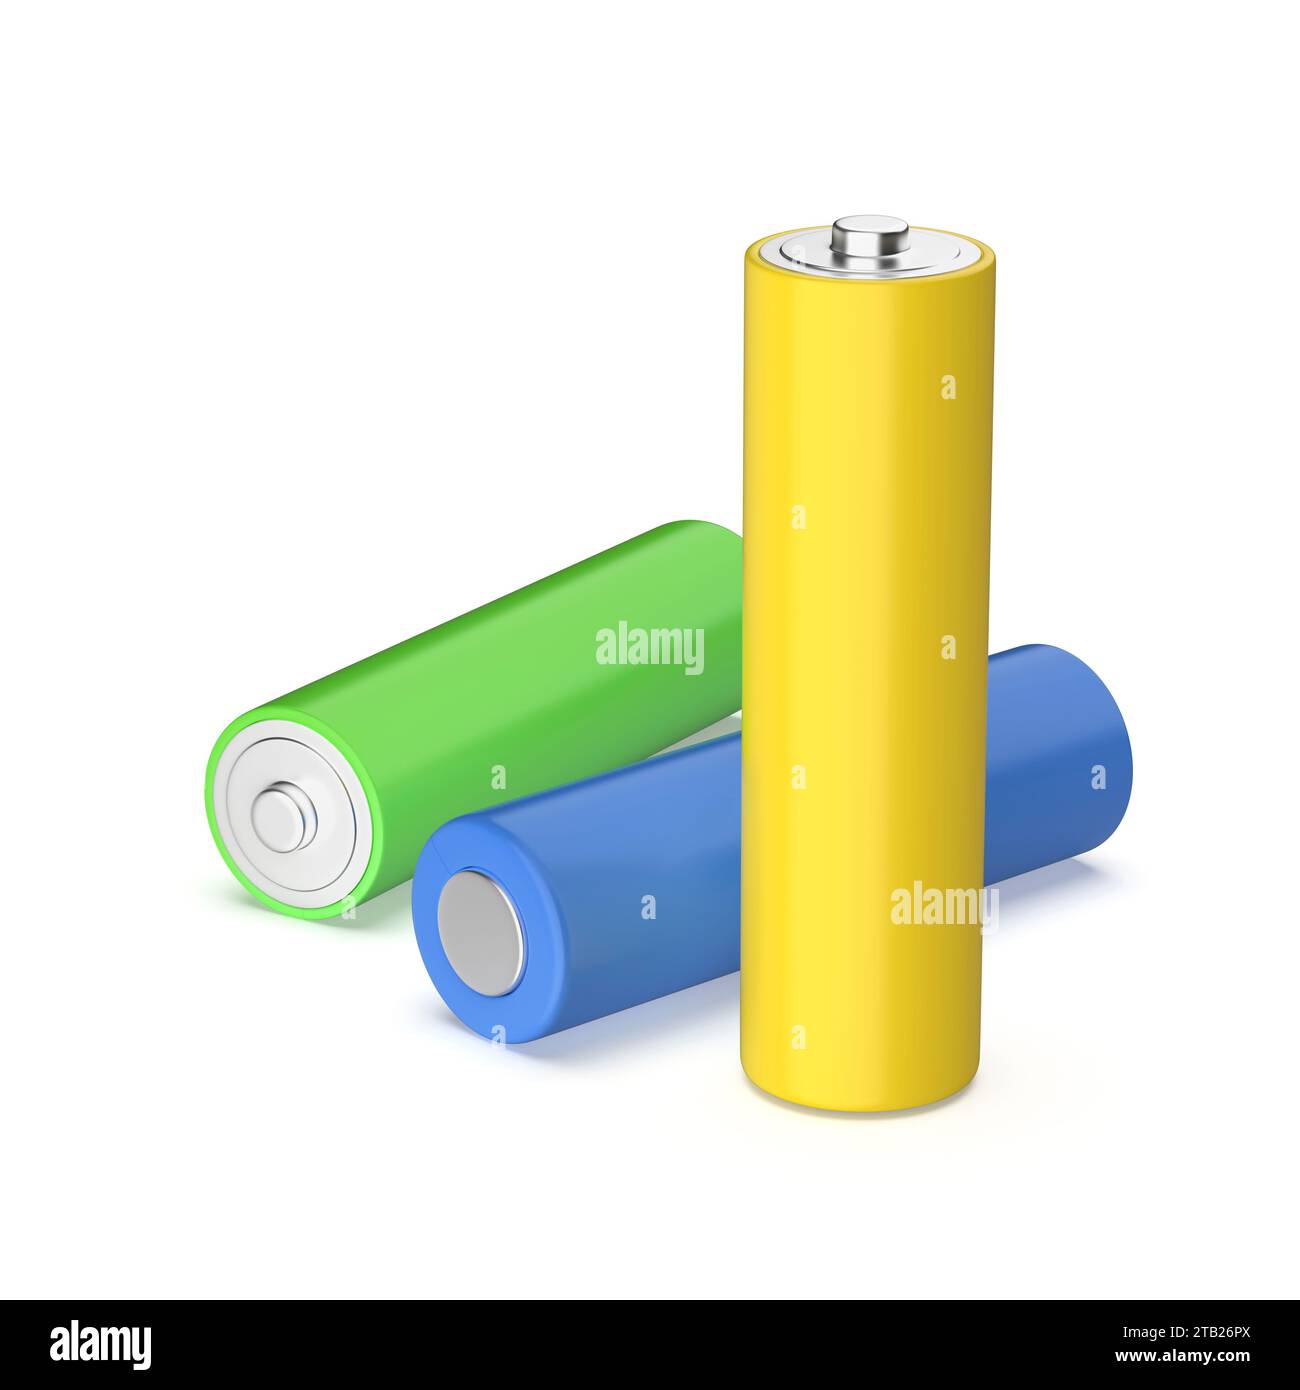 Three AA size batteries with different colors on white background Stock Photo